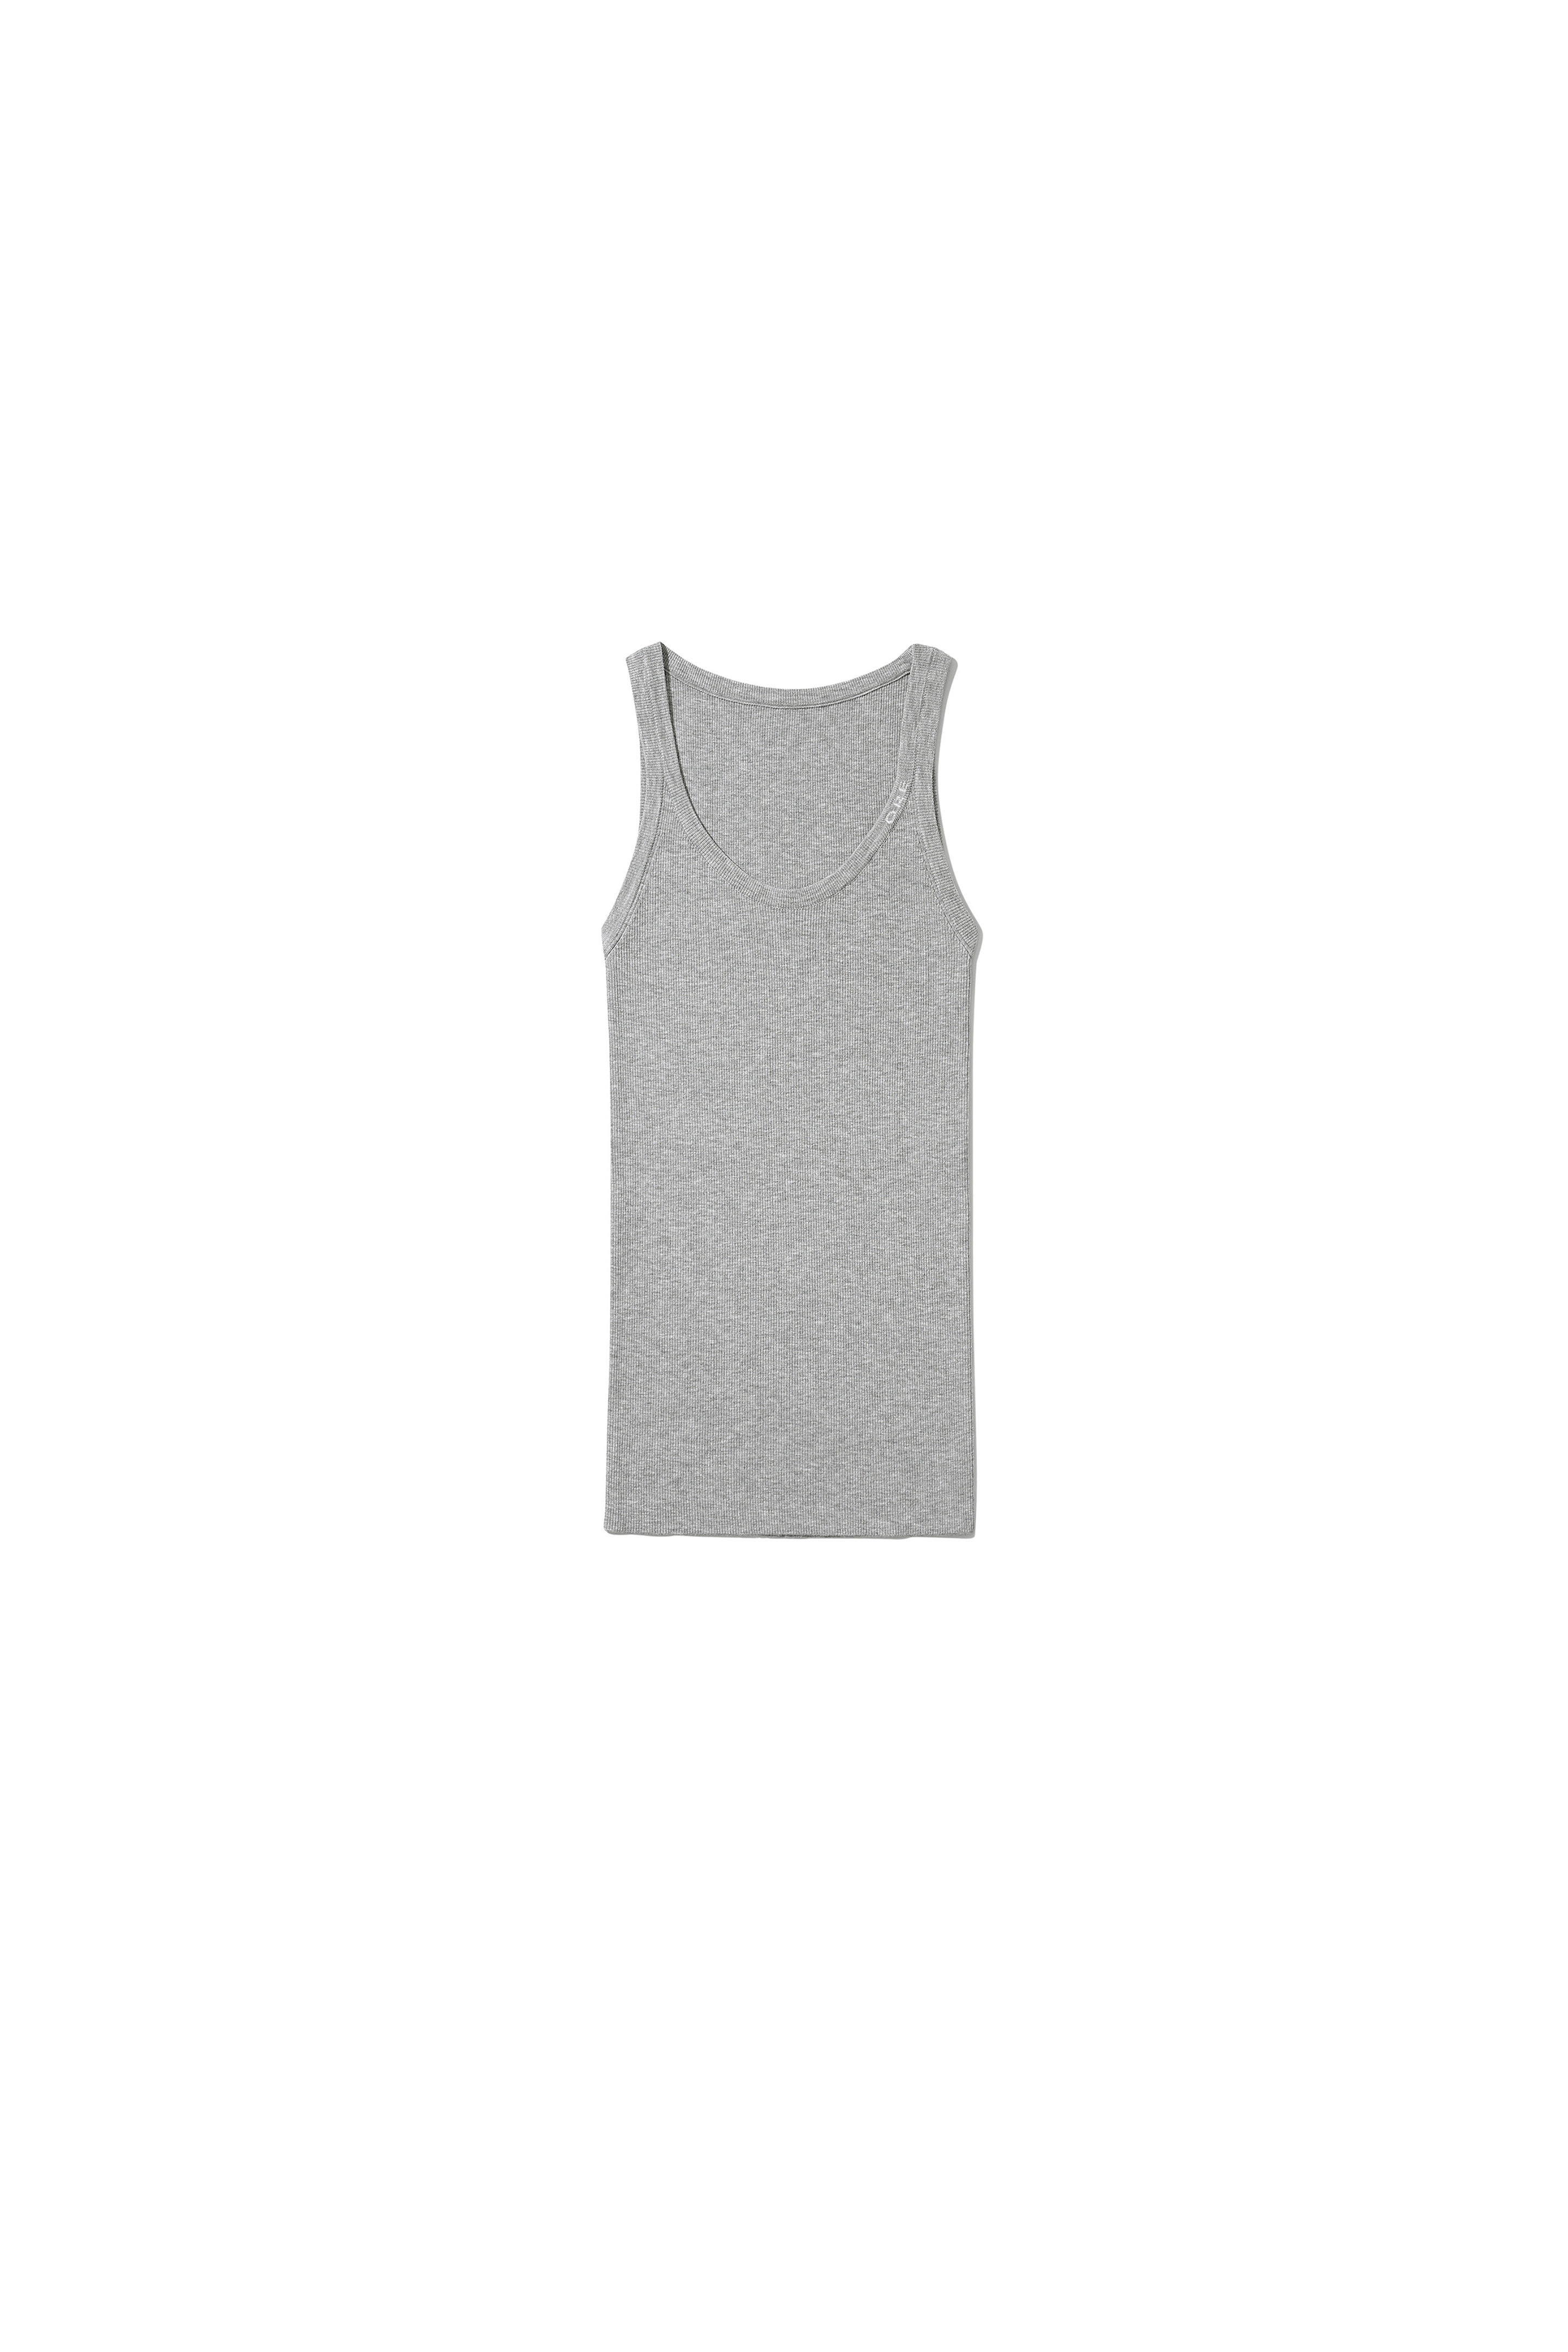 (Exclusive) ORE Knitted Sleeveless M.Grey